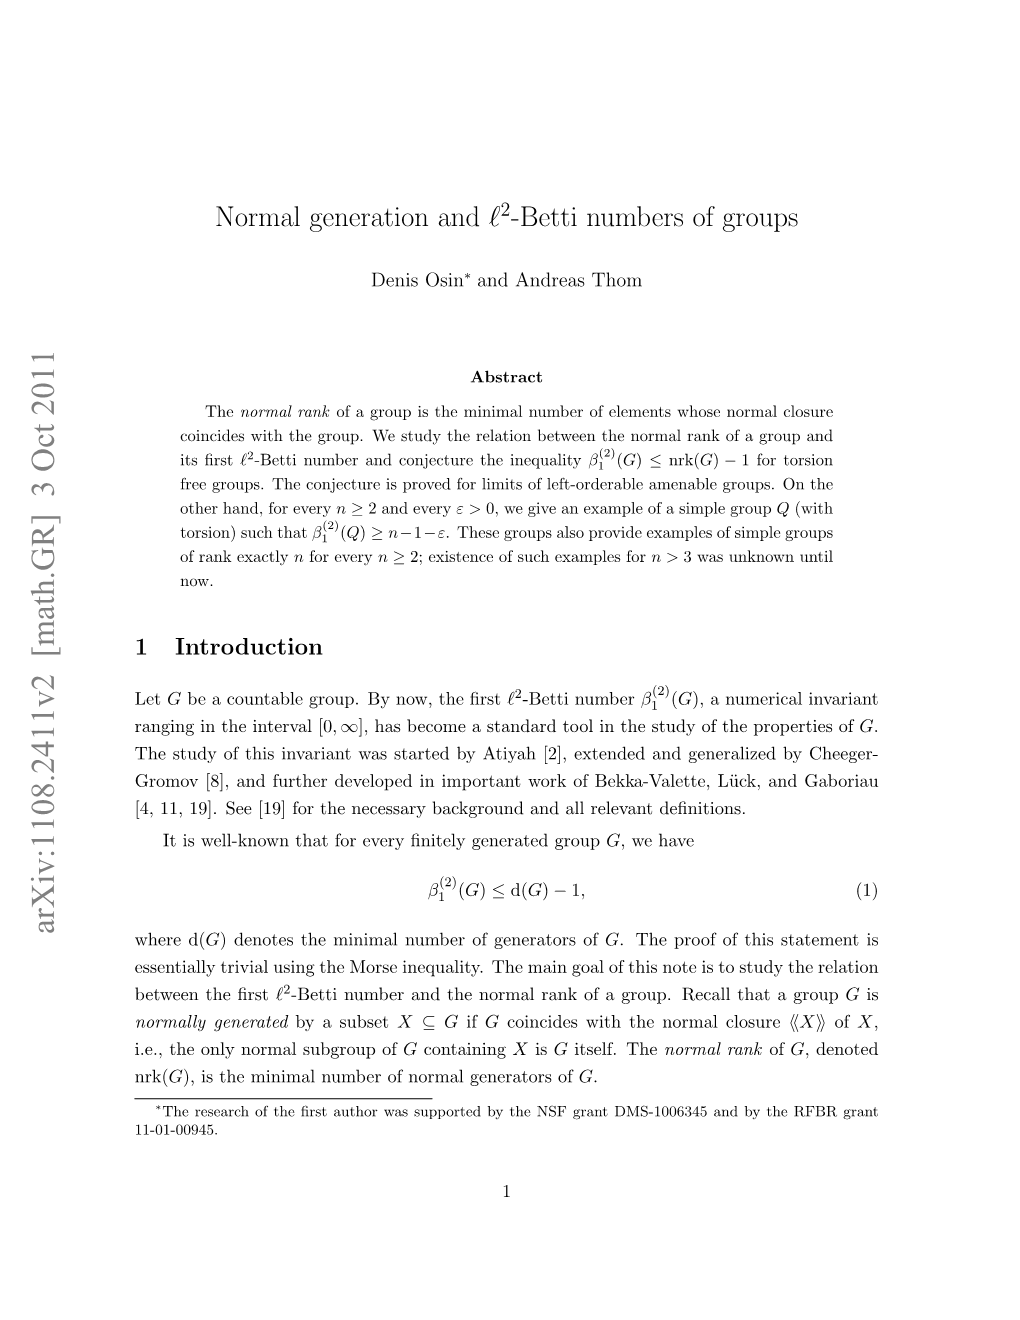 Normal Generation and L2-Betti Numbers of Groups